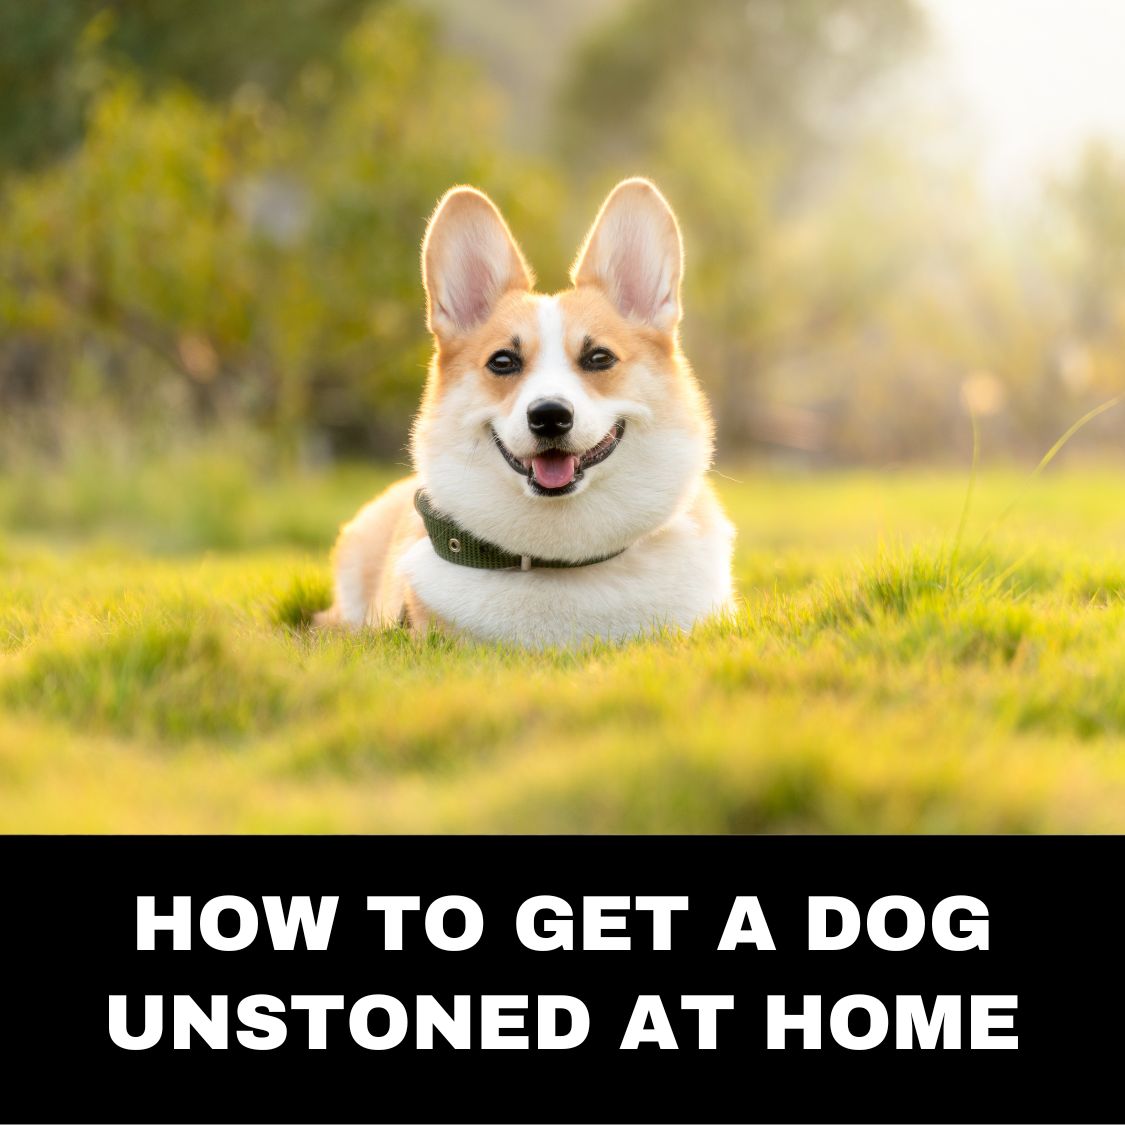 How to get a dog unstoned at home 22